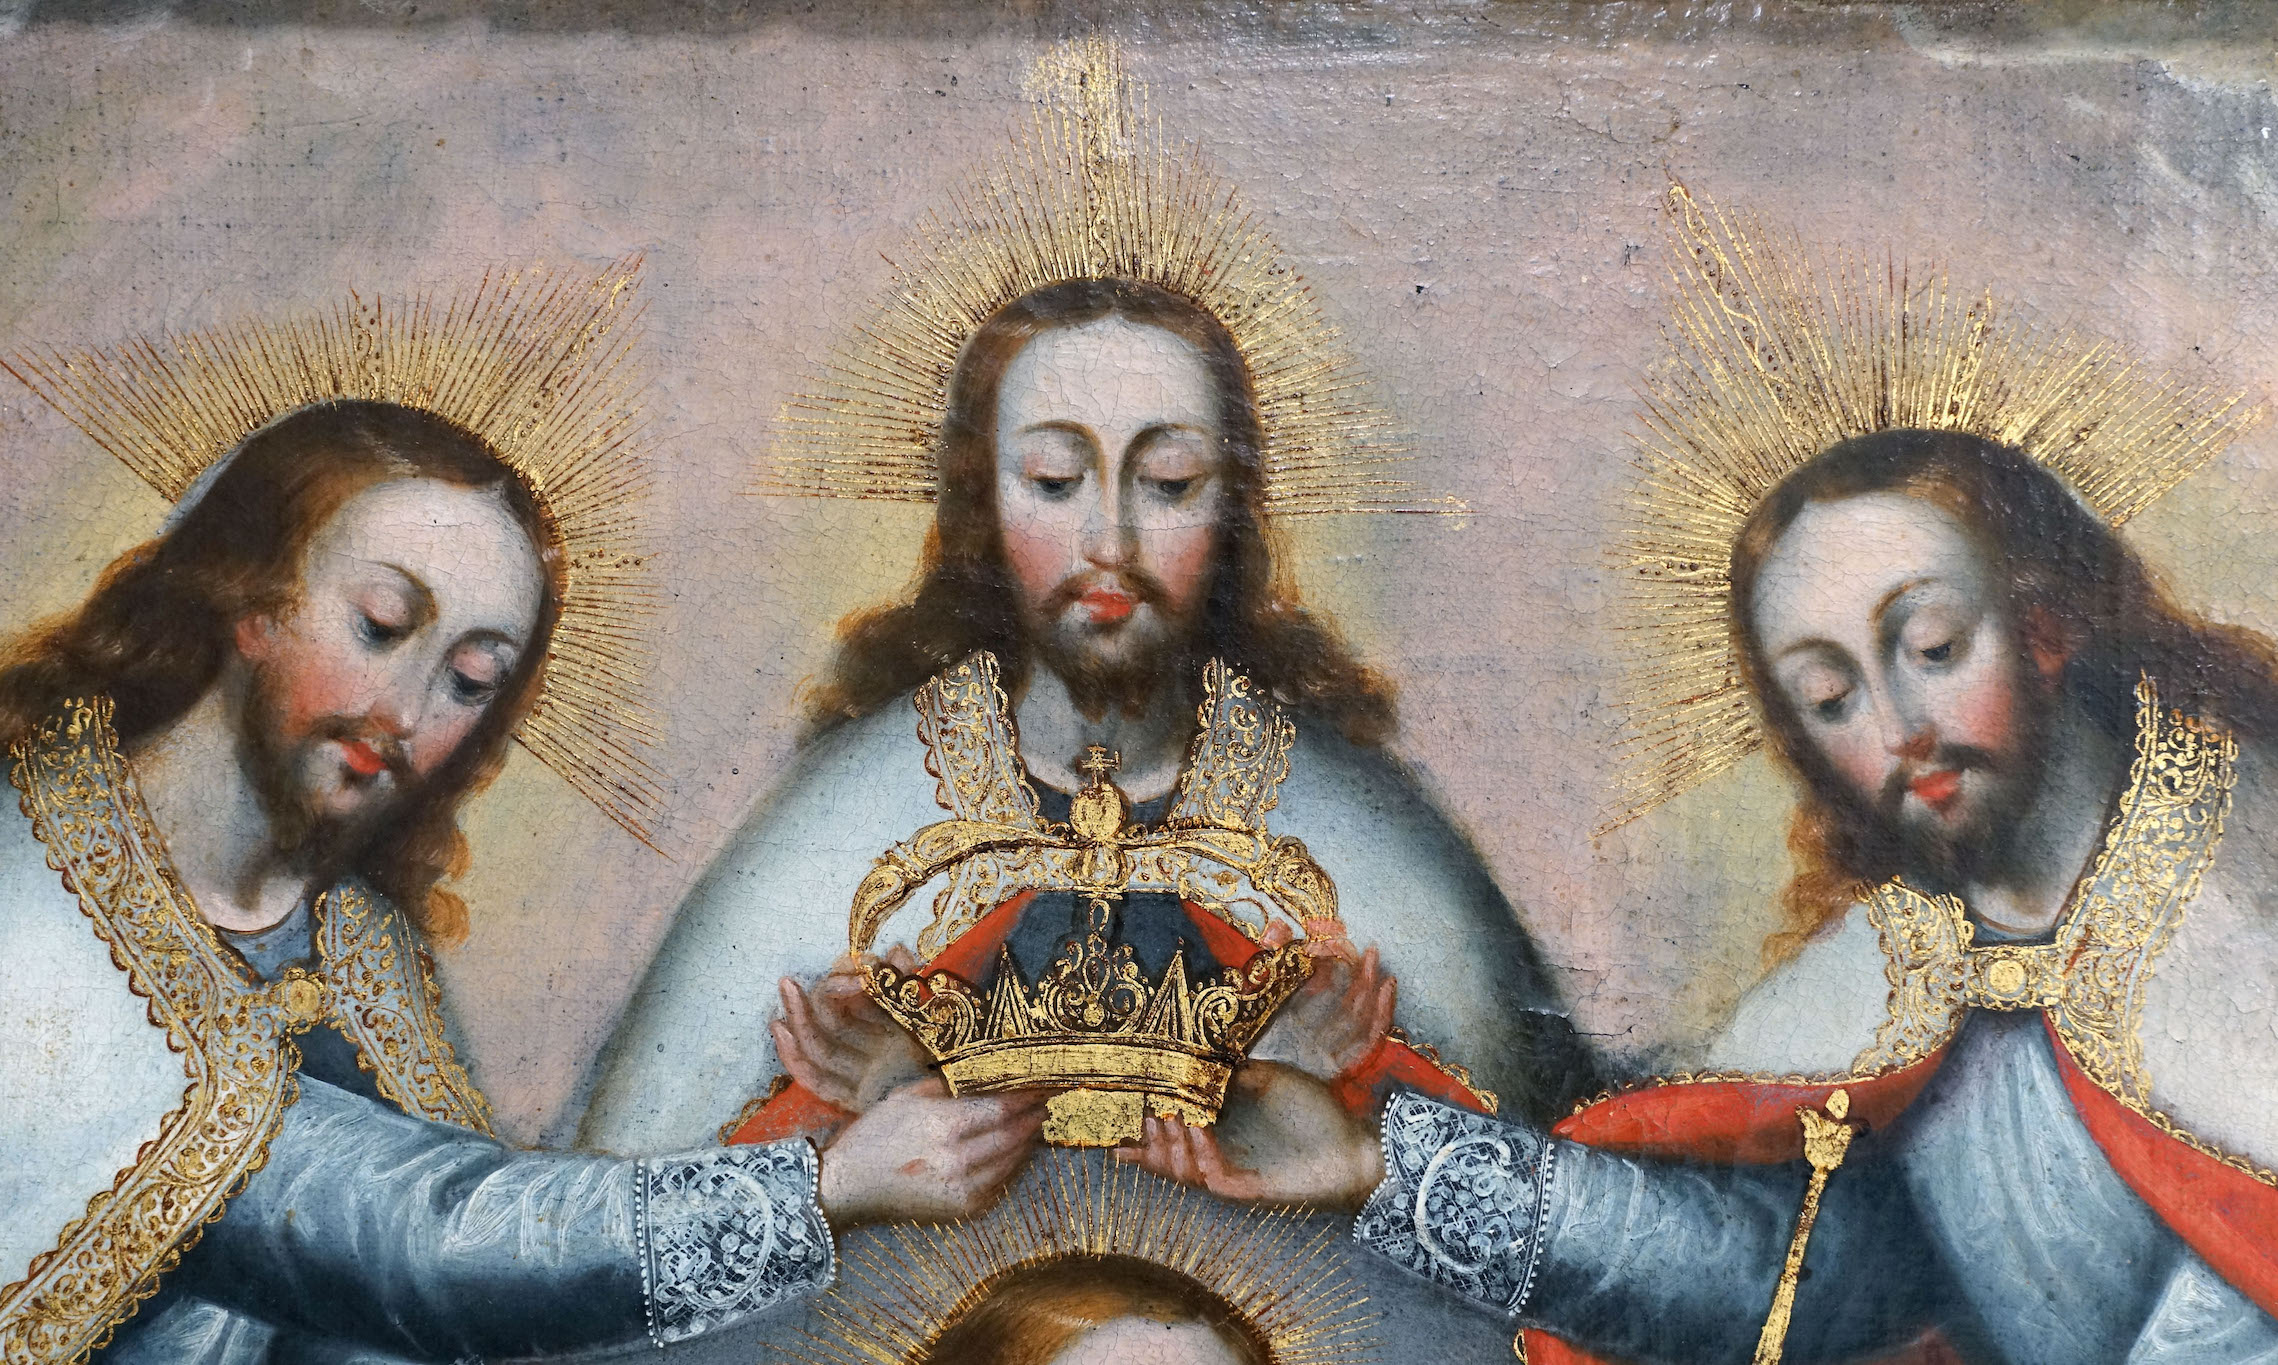 The Coronation of the Virgin by the Holy Trinity, 18th century, oil and gold on canvas, Cusco, Peru, 78.105 x 59.055 cm (Collection of the Carl & Marilynn Thoma Foundation)